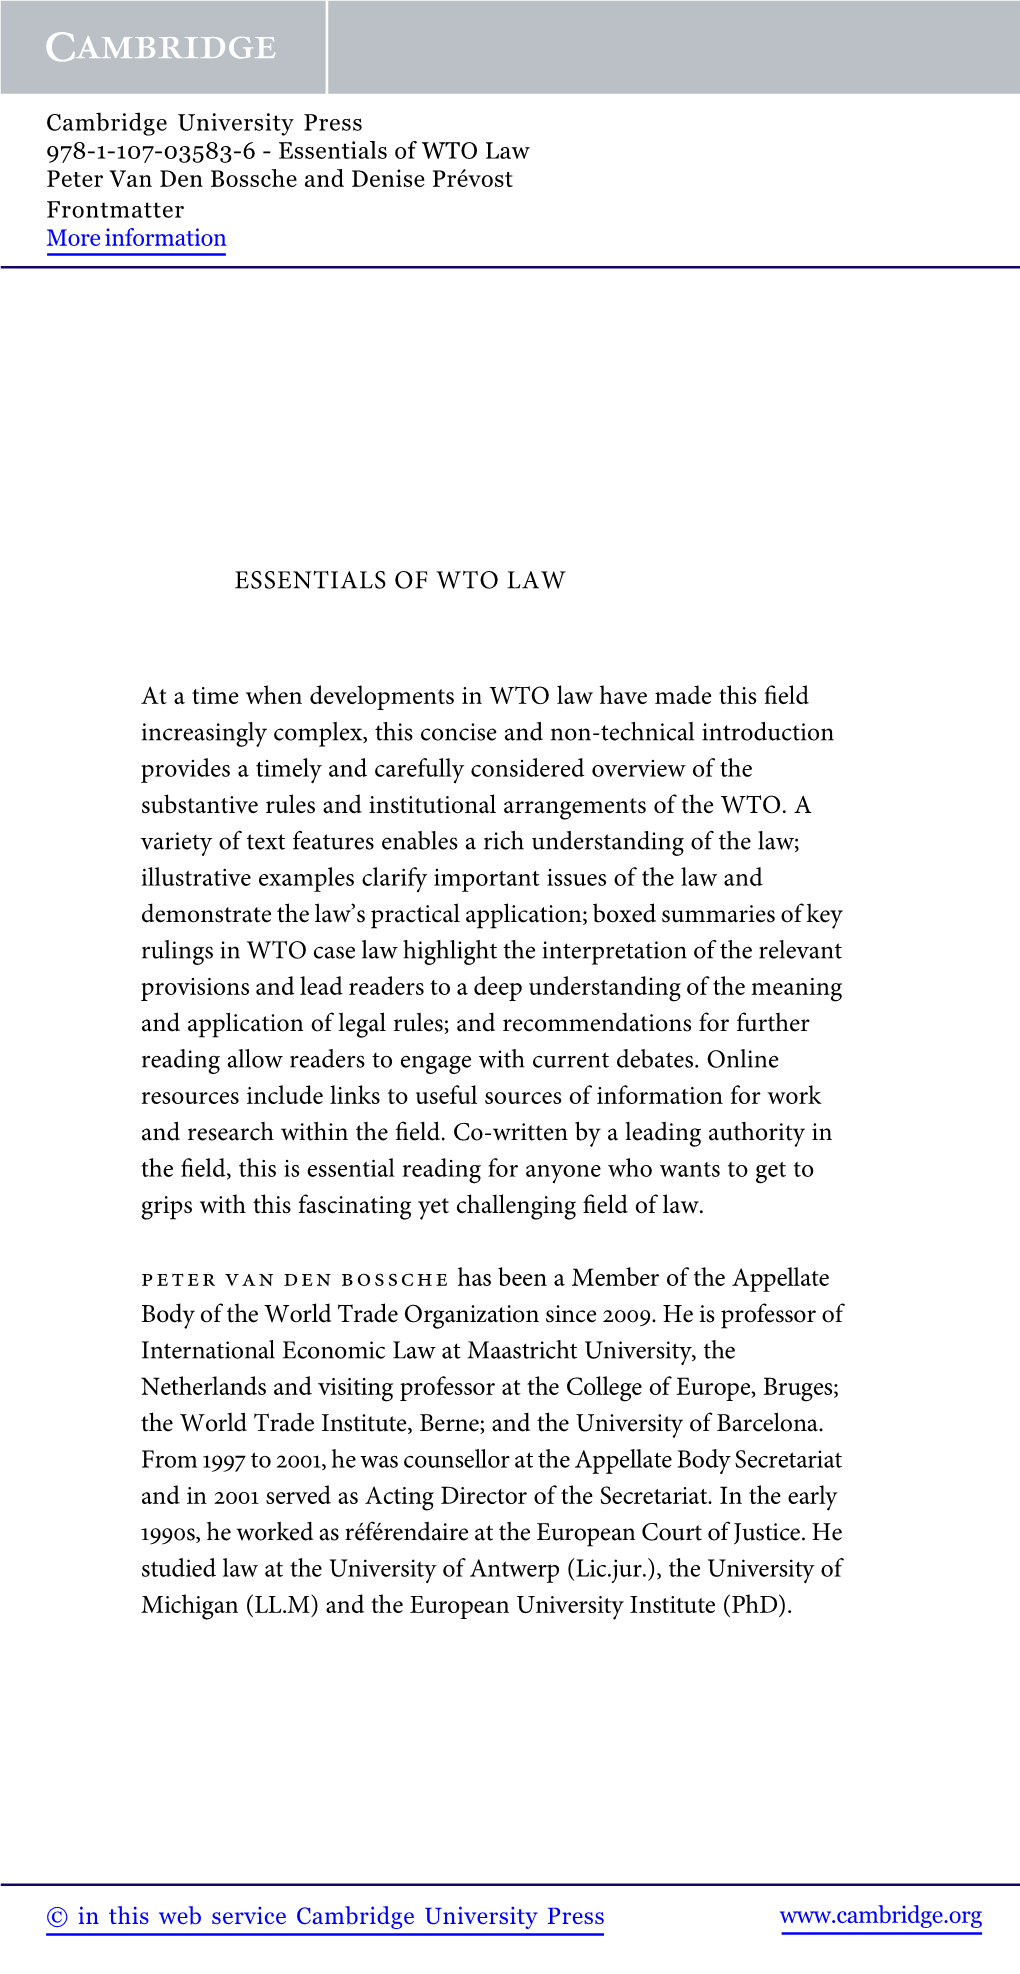 ESSENTIALS of WTO LAW at a Time When Developments in WTO Law